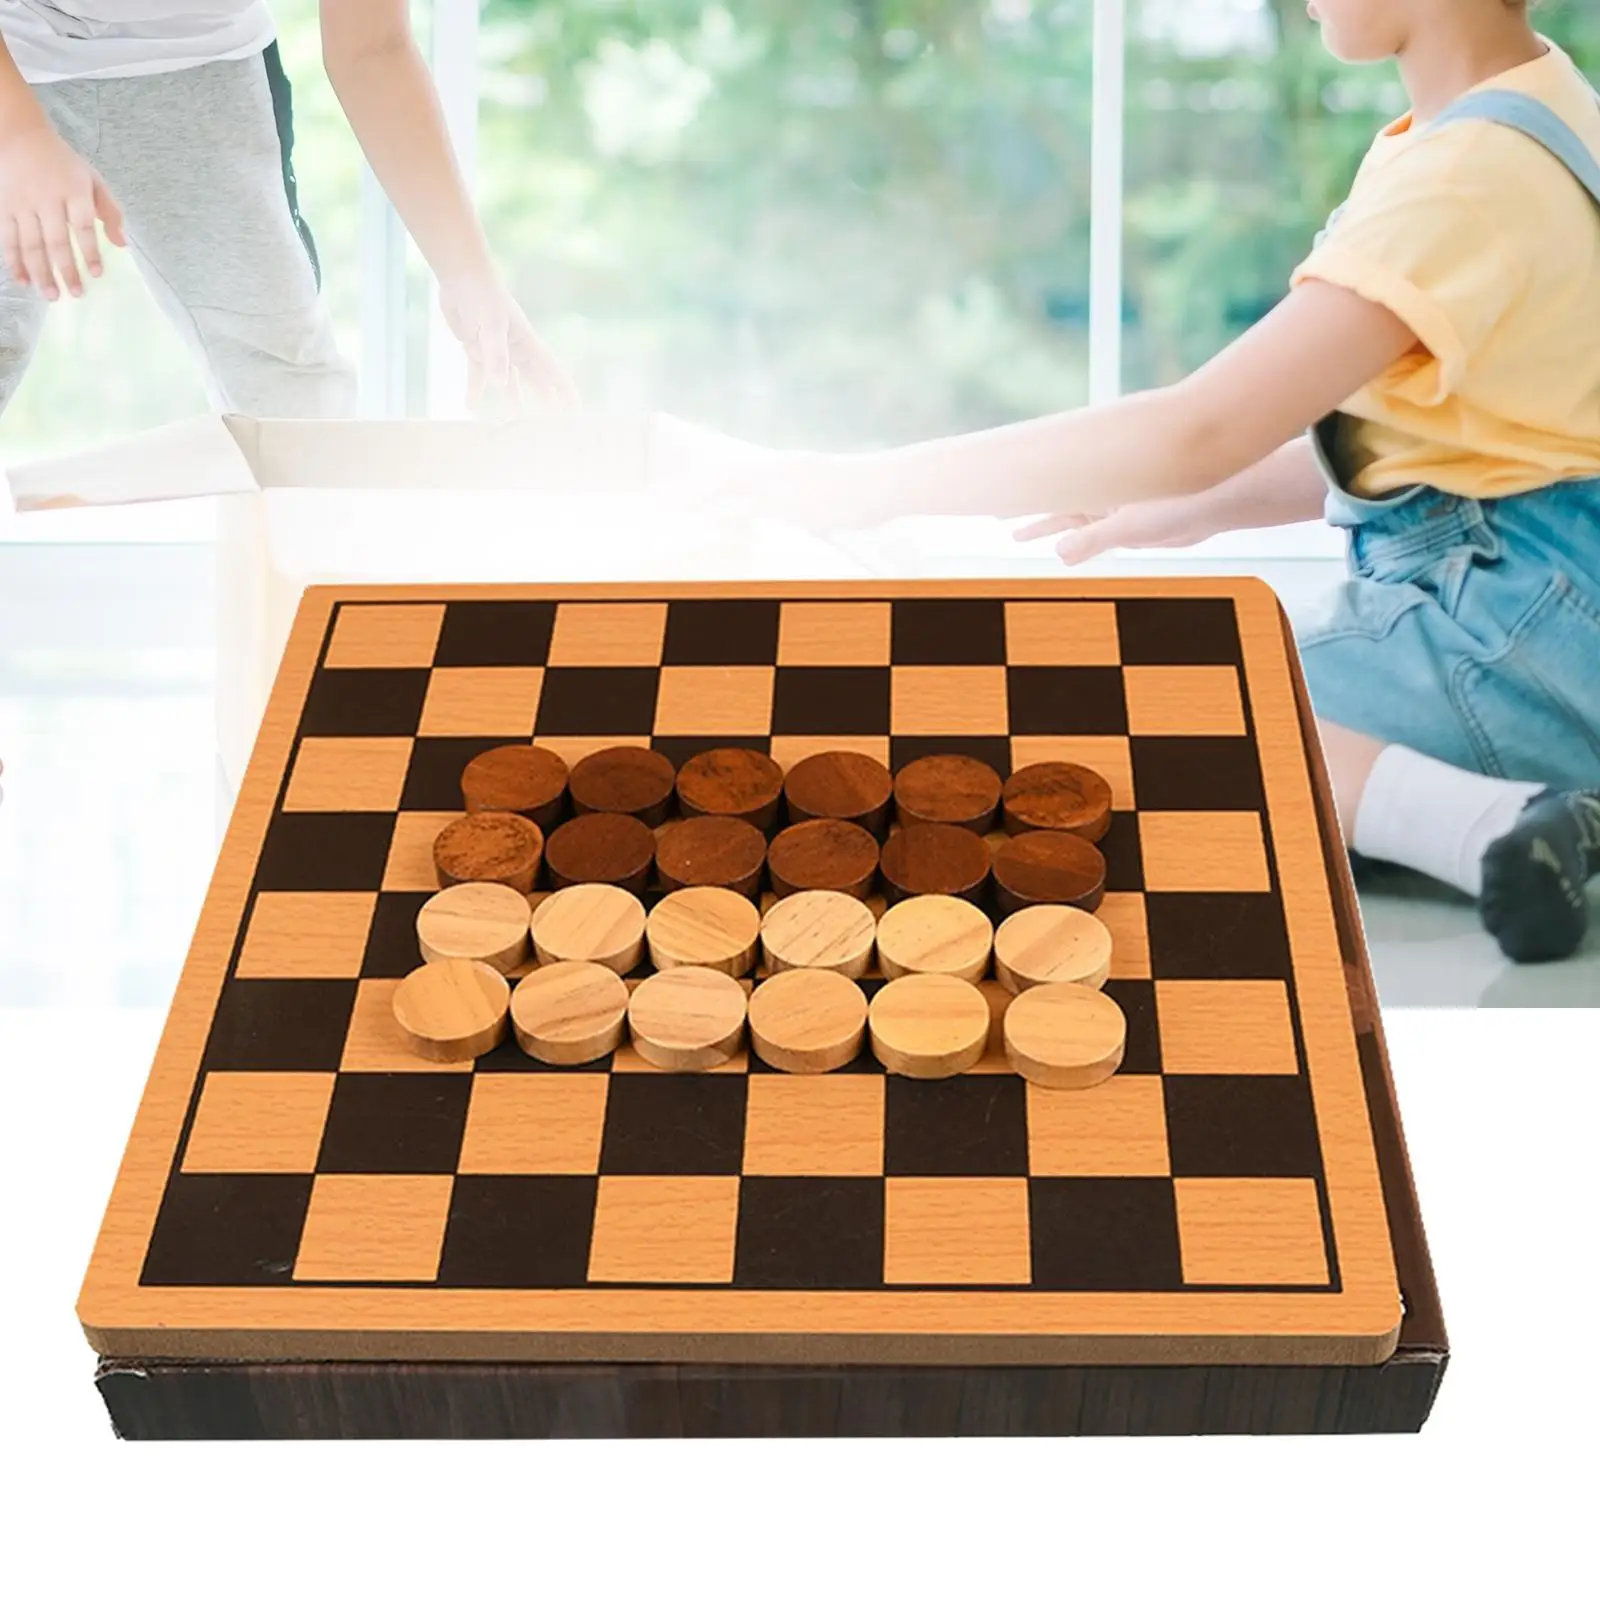 Chess Game Set Vintage Style Accessories Puzzle Chess Decorative Chessmen Figurine Chess Pieces for Children Kids Home Gifts